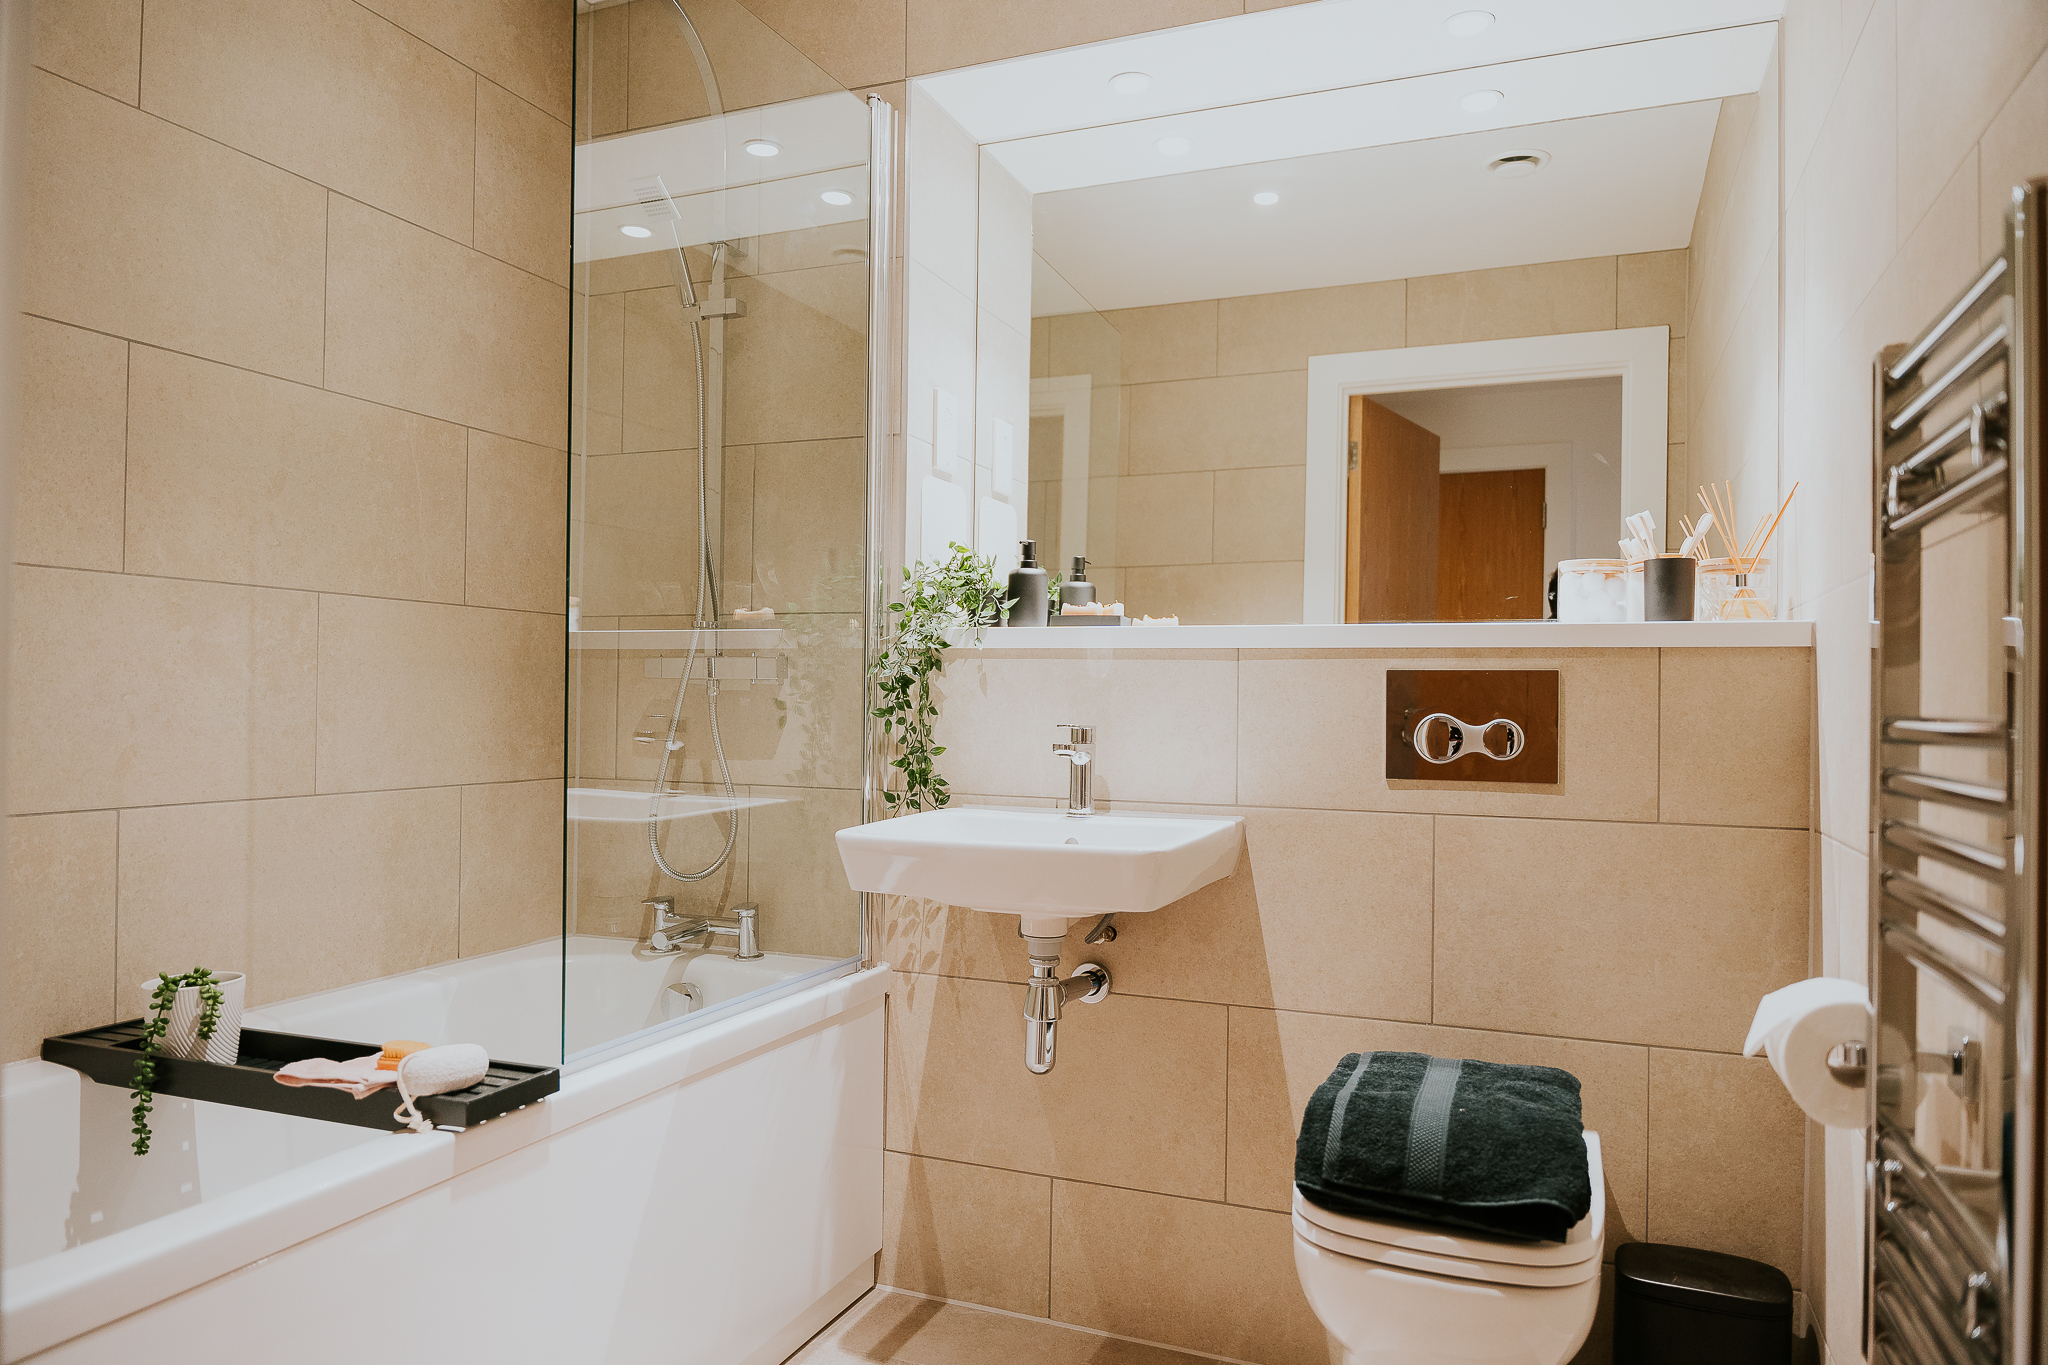 Image of a bathroom at Guinness Homes' Point Cross development - available to purchase through Shared Ownership on Share to Buy!